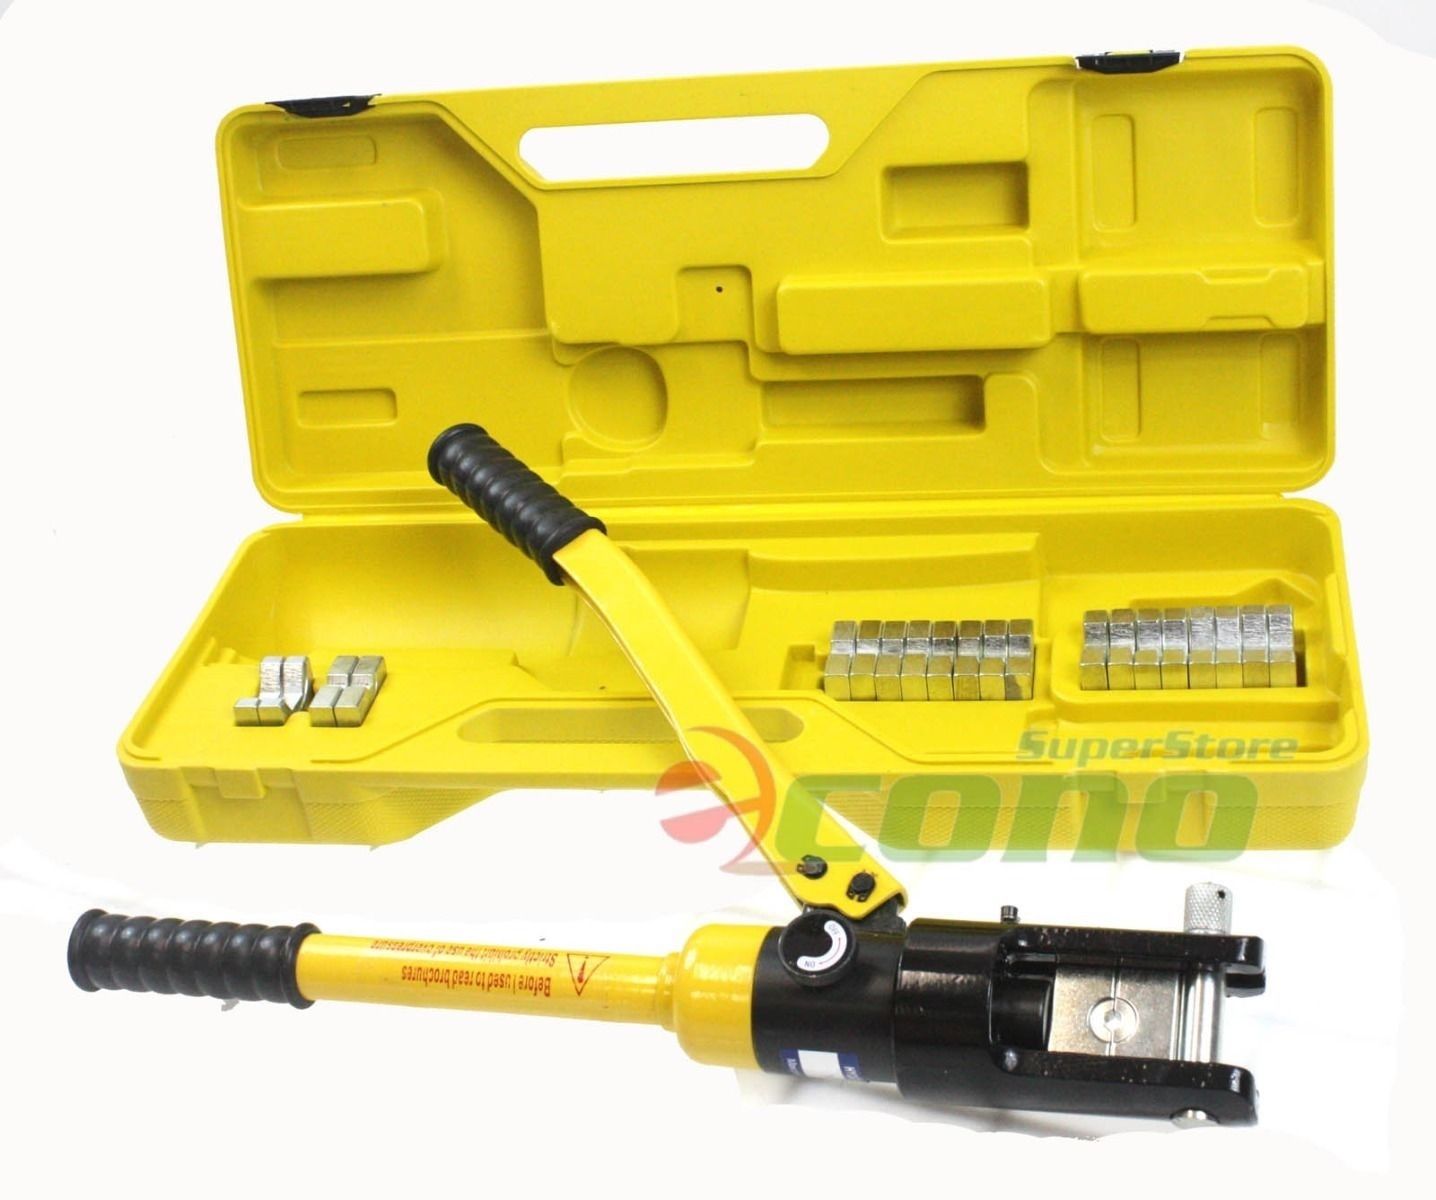 16 Ton Hydraulic Wire Crimper Crimping Tool 11 Dies Battery Cable Lug Terminal 